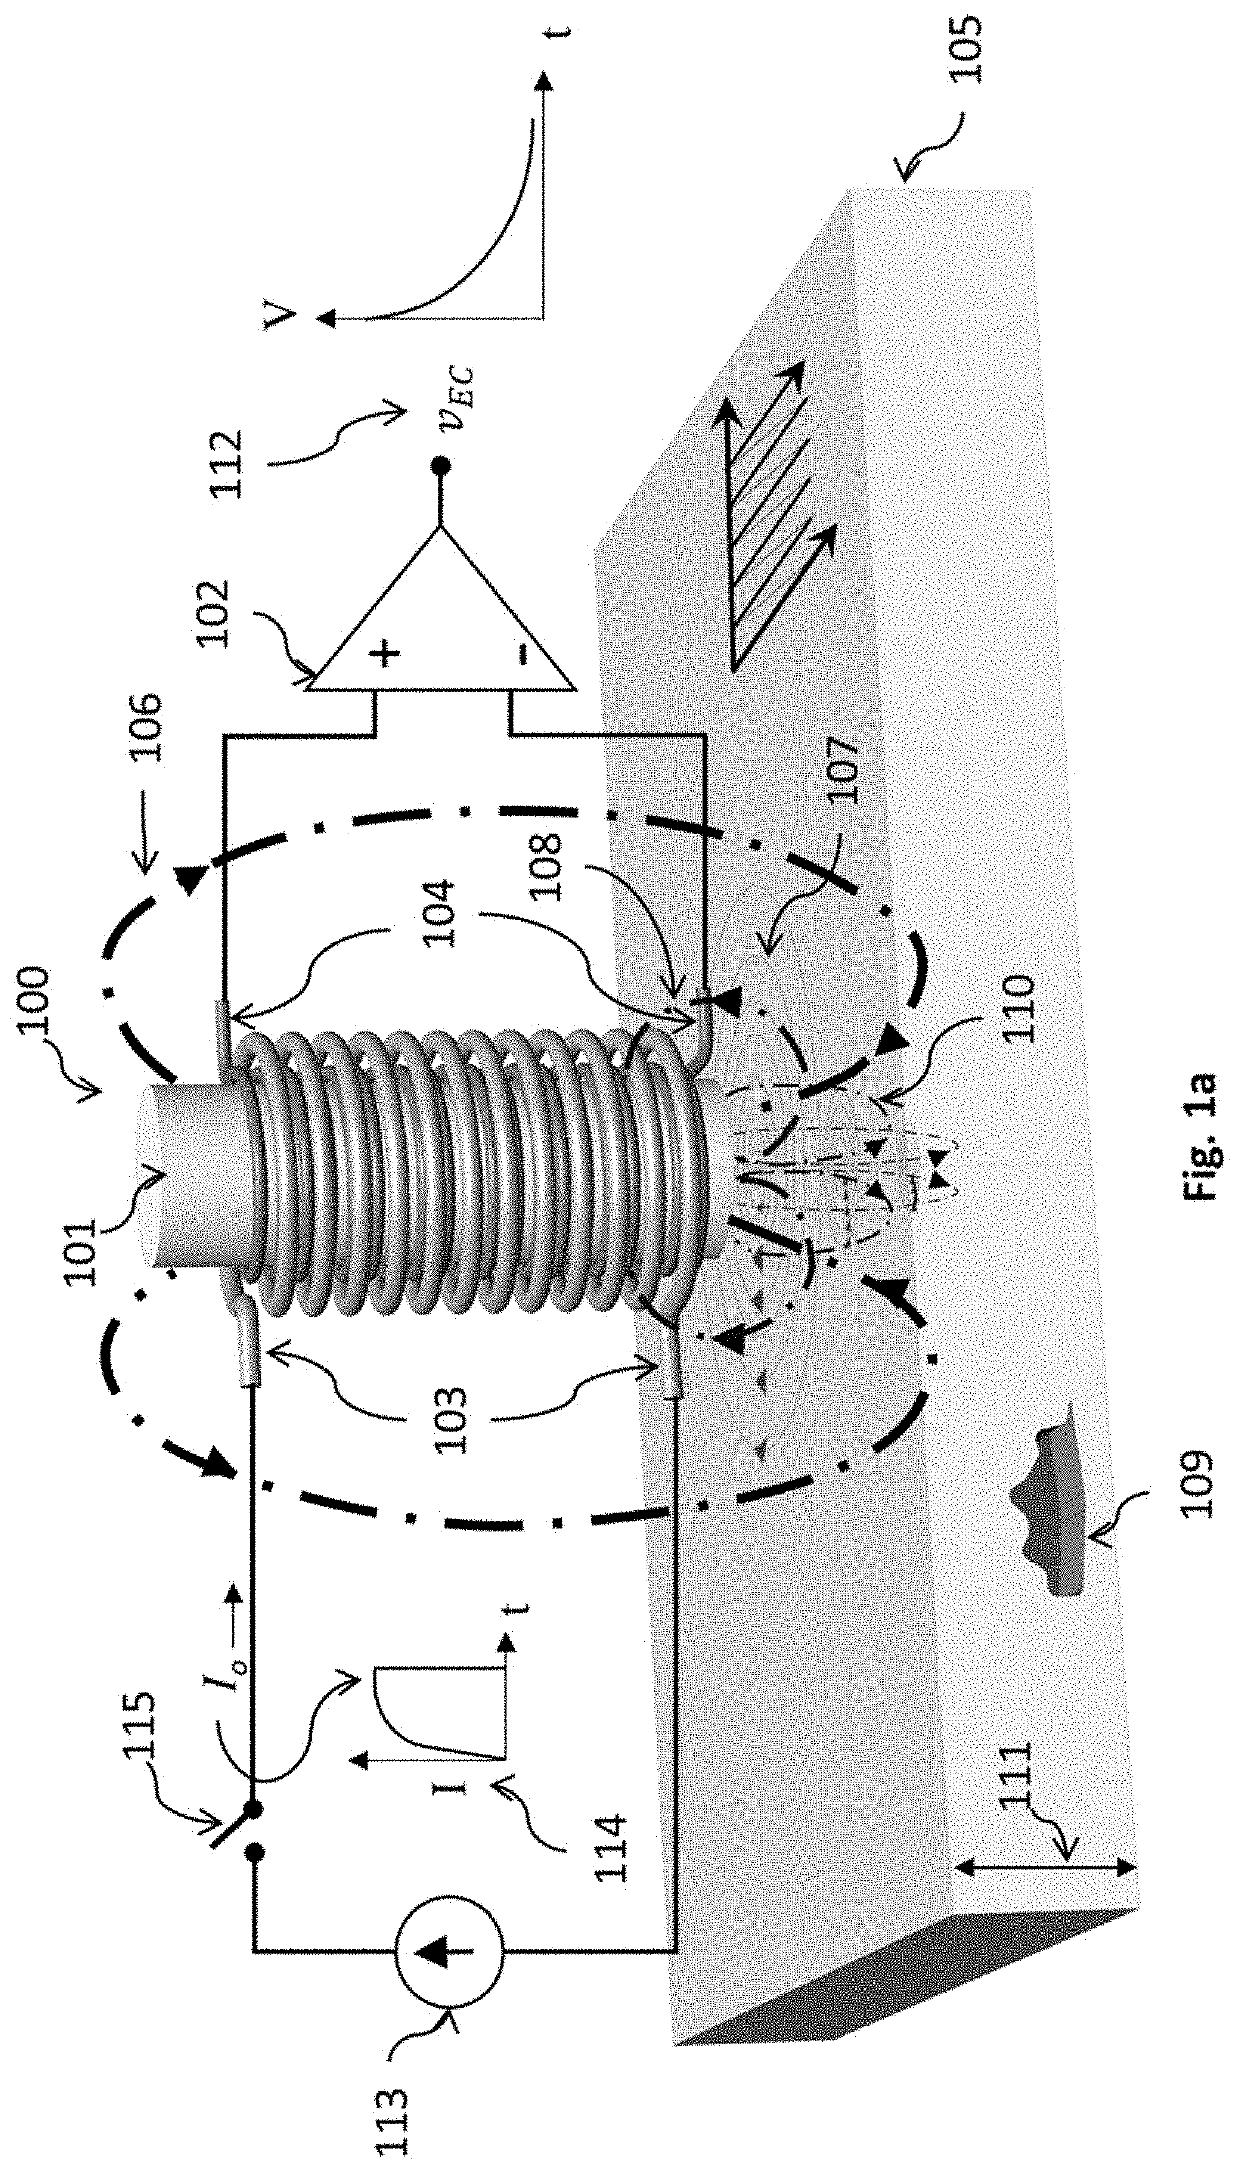 Hybrid magnetic core for inductive transducer